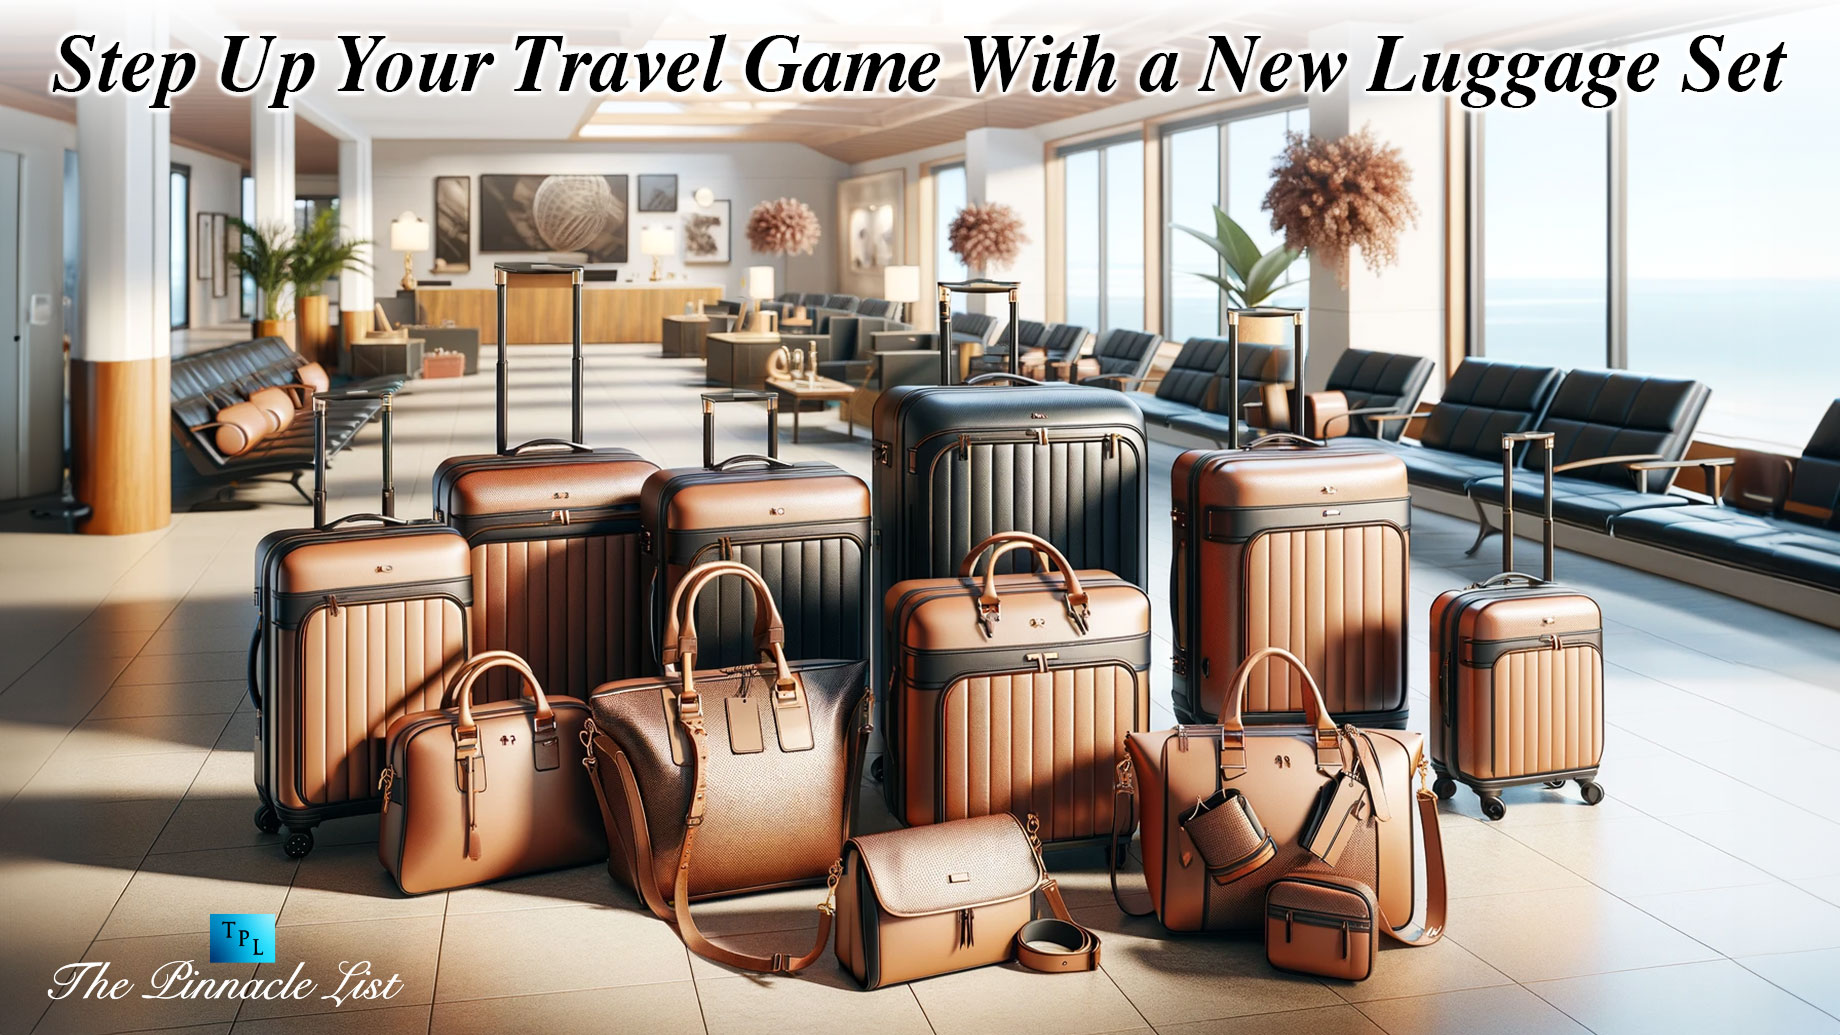 Step Up Your Travel Game With a New Luggage Set